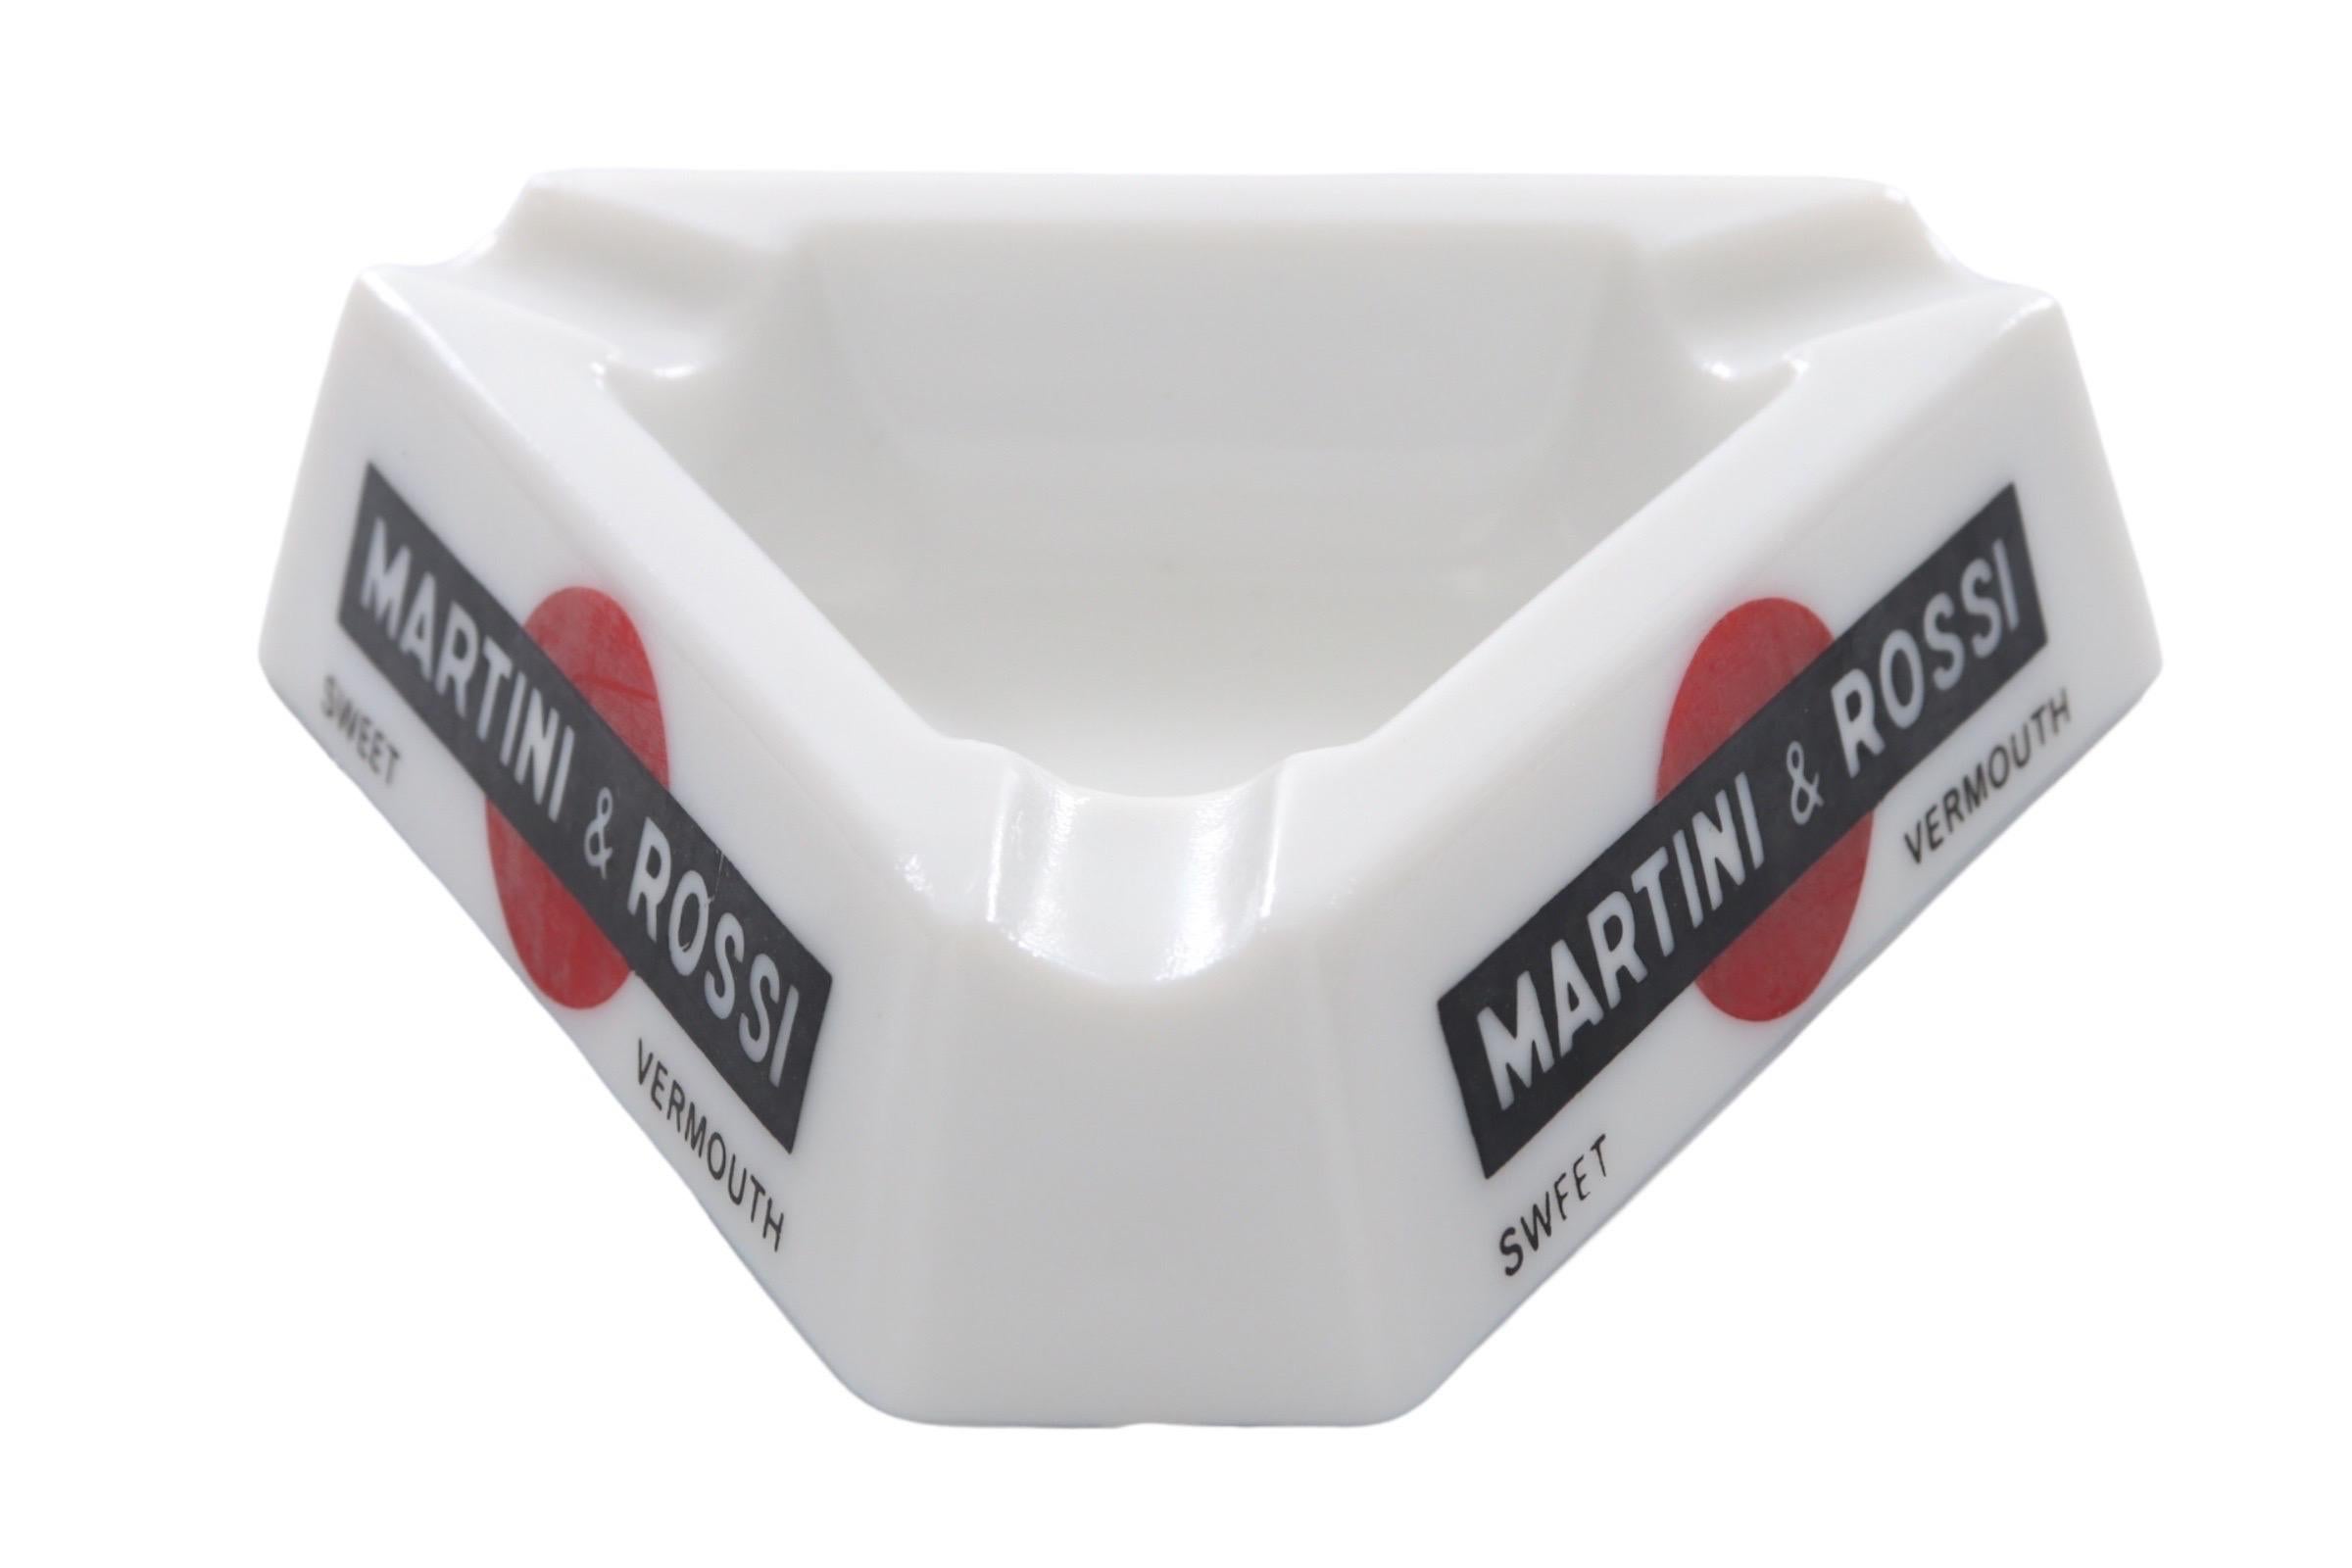 A French Martini & Rossi triangular ashtray. White Opalex is branded Martini & Rossi Sweet Vermouth on each side. Each corner has a beveled cigarette rest. Marked “Made in France, Renfield Importers, New York, NY” underneath.